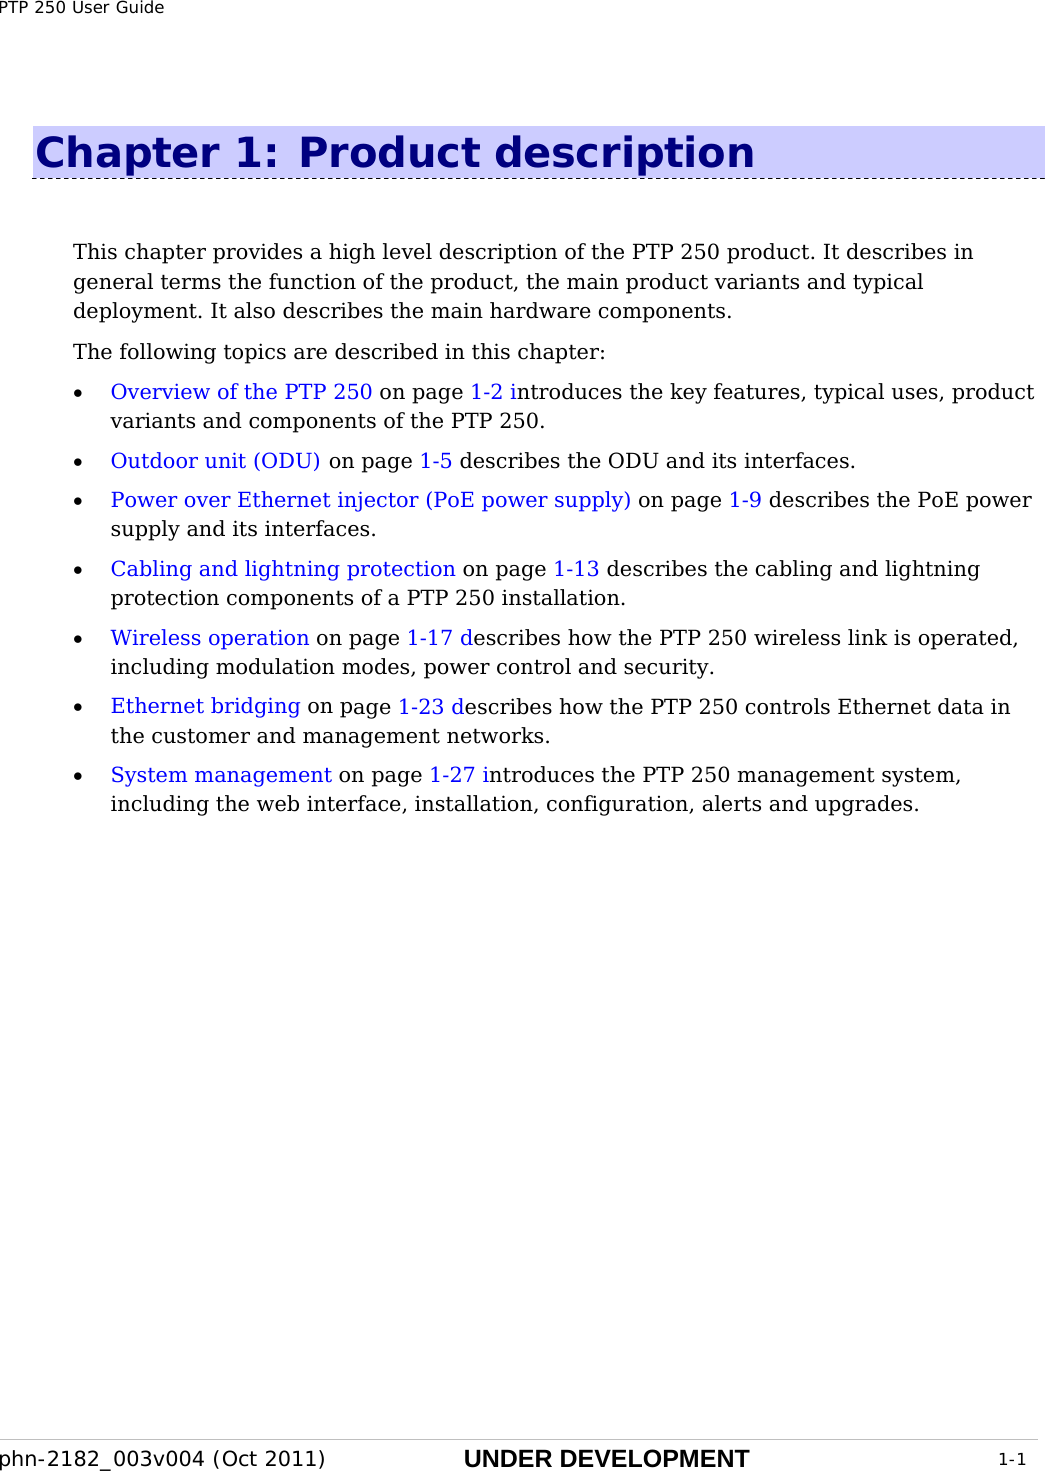 PTP 250 User Guide phn-2182_003v004 (Oct 2011)  UNDER DEVELOPMENT  1-1  Chapter 1:  Product description This chapter provides a high level description of the PTP 250 product. It describes in general terms the function of the product, the main product variants and typical deployment. It also describes the main hardware components. The following topics are described in this chapter: • Overview of the PTP 250 on page 1-2 introduces the key features, typical uses, product variants and components of the PTP 250. • Outdoor unit (ODU) on page 1-5 describes the ODU and its interfaces. • Power over Ethernet injector (PoE power supply) on page 1-9 describes the PoE power supply and its interfaces. • Cabling and lightning protection on page 1-13 describes the cabling and lightning protection components of a PTP 250 installation. • Wireless operation on page 1-17 describes how the PTP 250 wireless link is operated, including modulation modes, power control and security. • Ethernet bridging on page 1-23 describes how the PTP 250 controls Ethernet data in the customer and management networks. • System management on page 1-27 introduces the PTP 250 management system, including the web interface, installation, configuration, alerts and upgrades.  